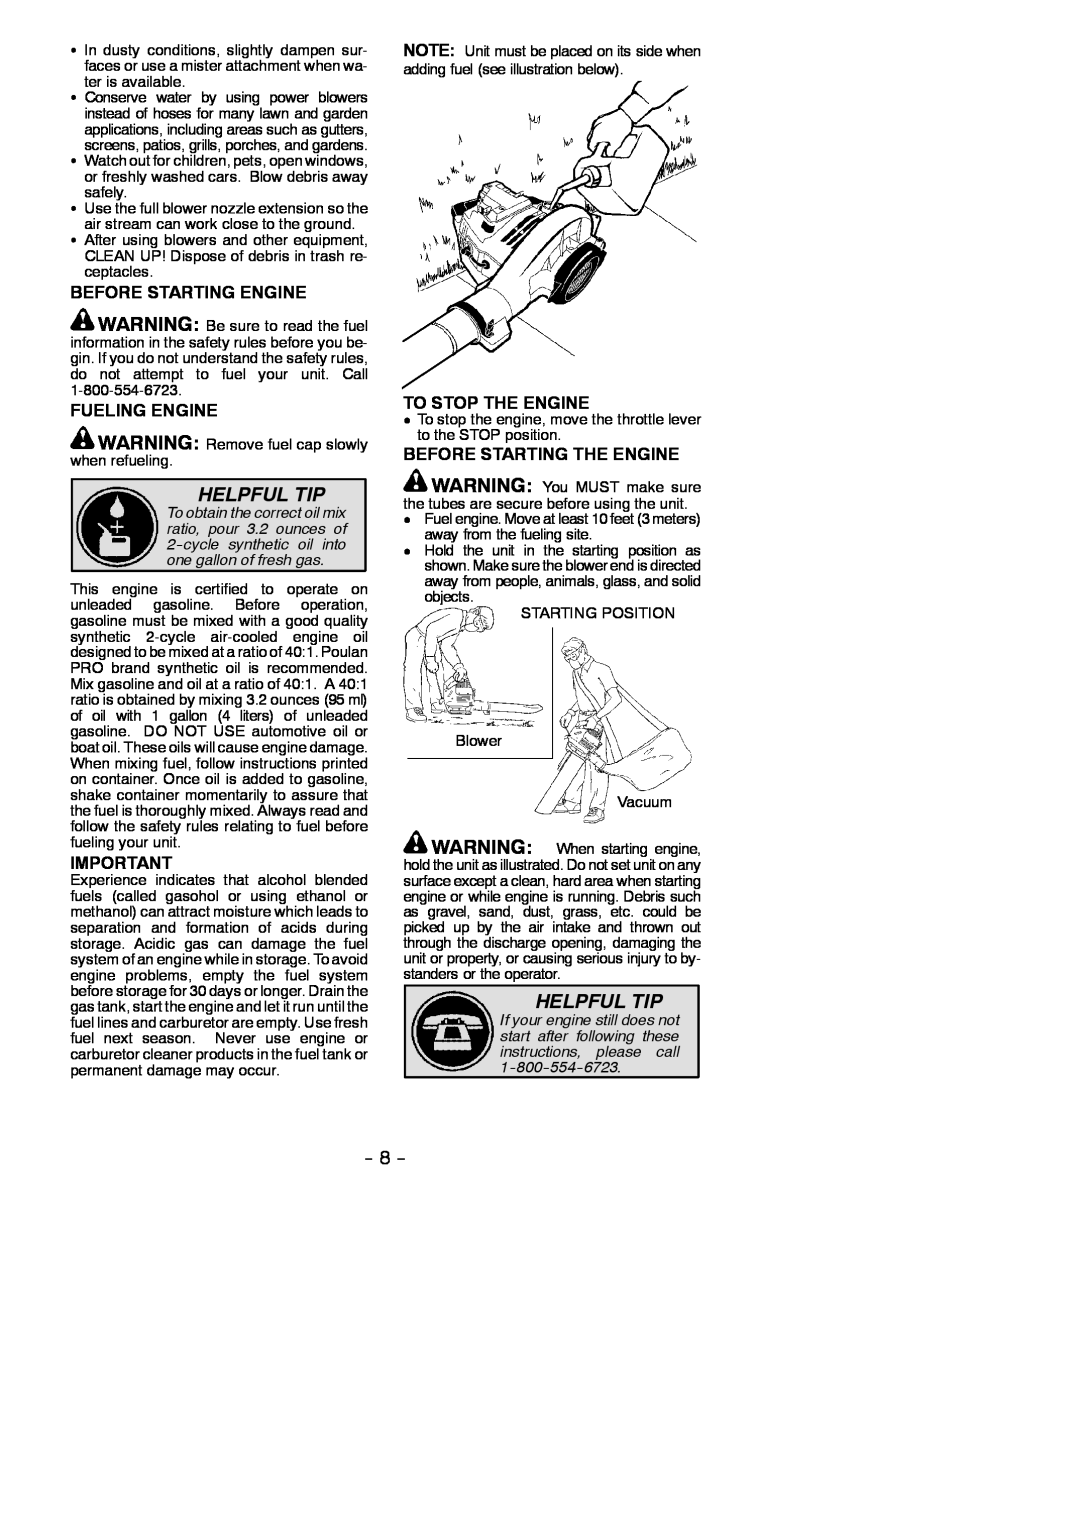 Poulan BVM200 LE Helpful Tip, Before Starting Engine, Fueling Engine, To Stop The Engine, Before Starting The Engine 